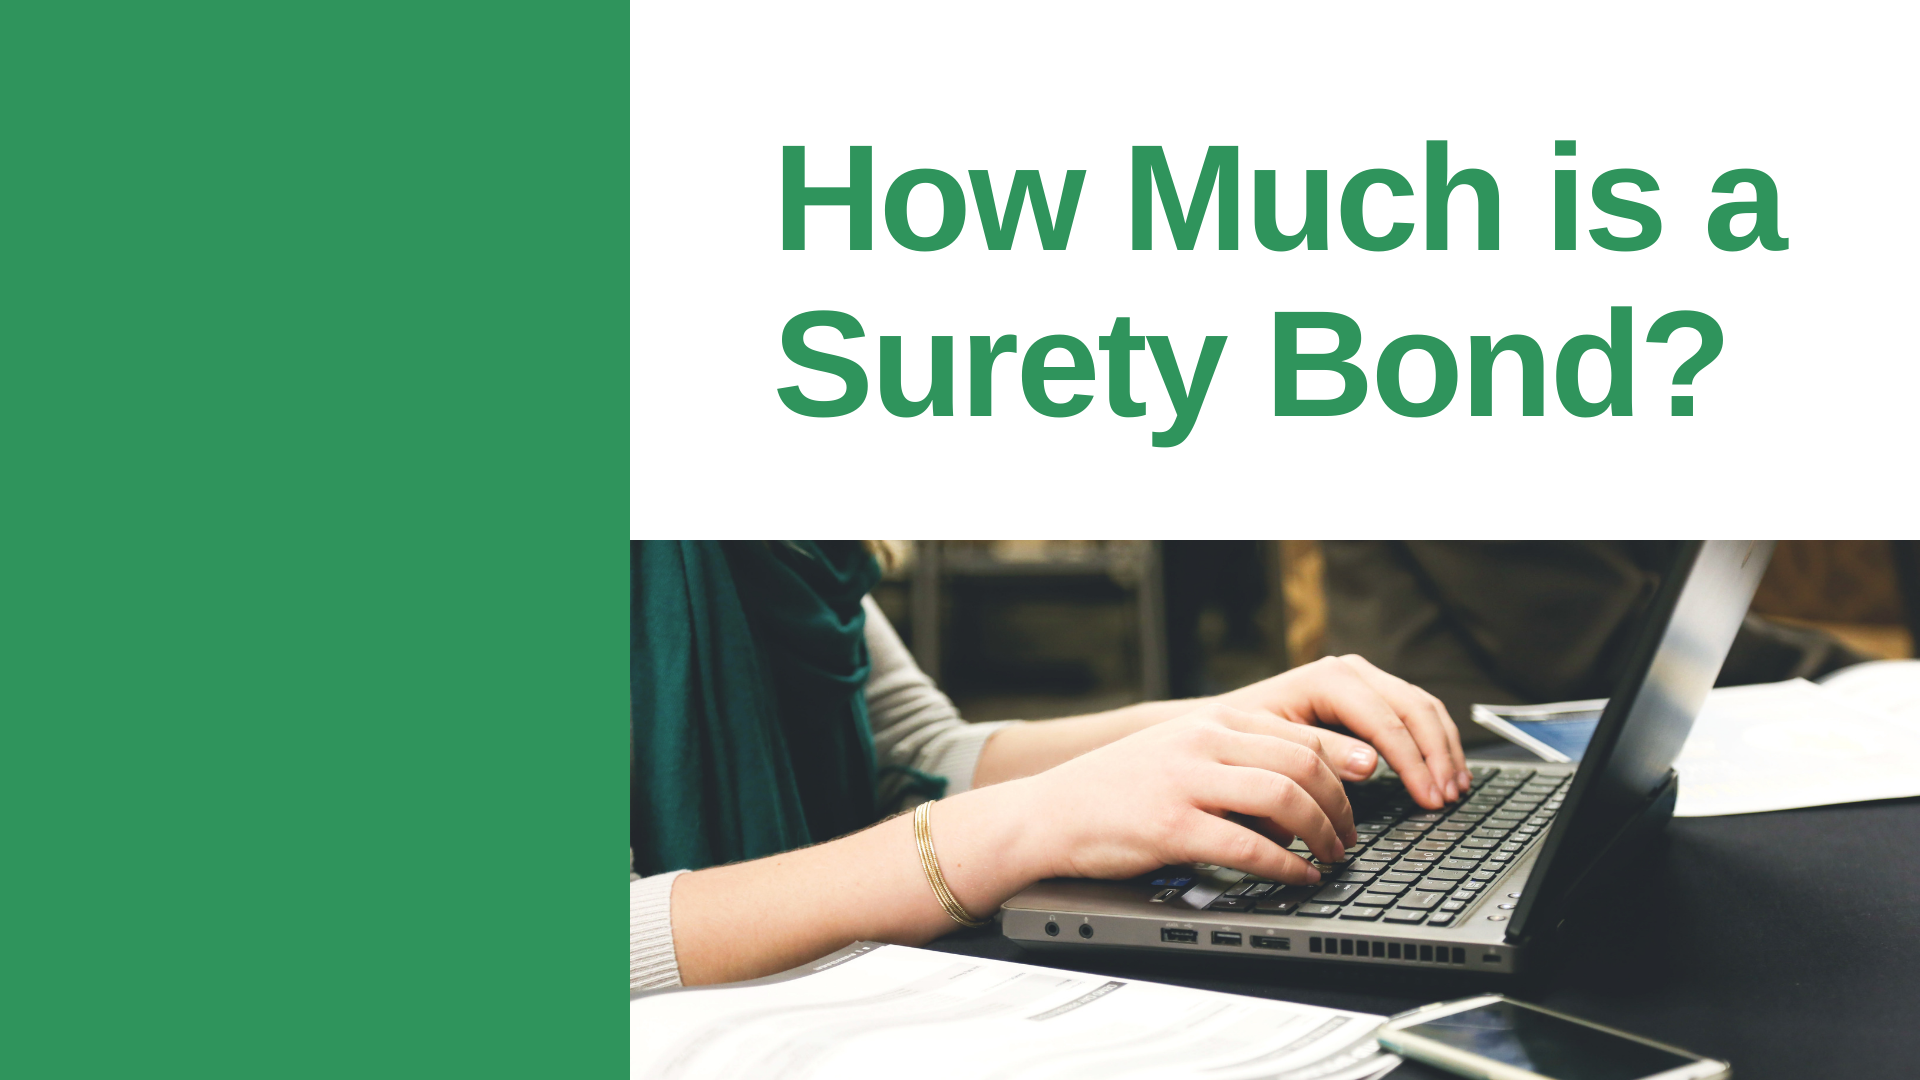 surety bond - What is the cost of a surety bond